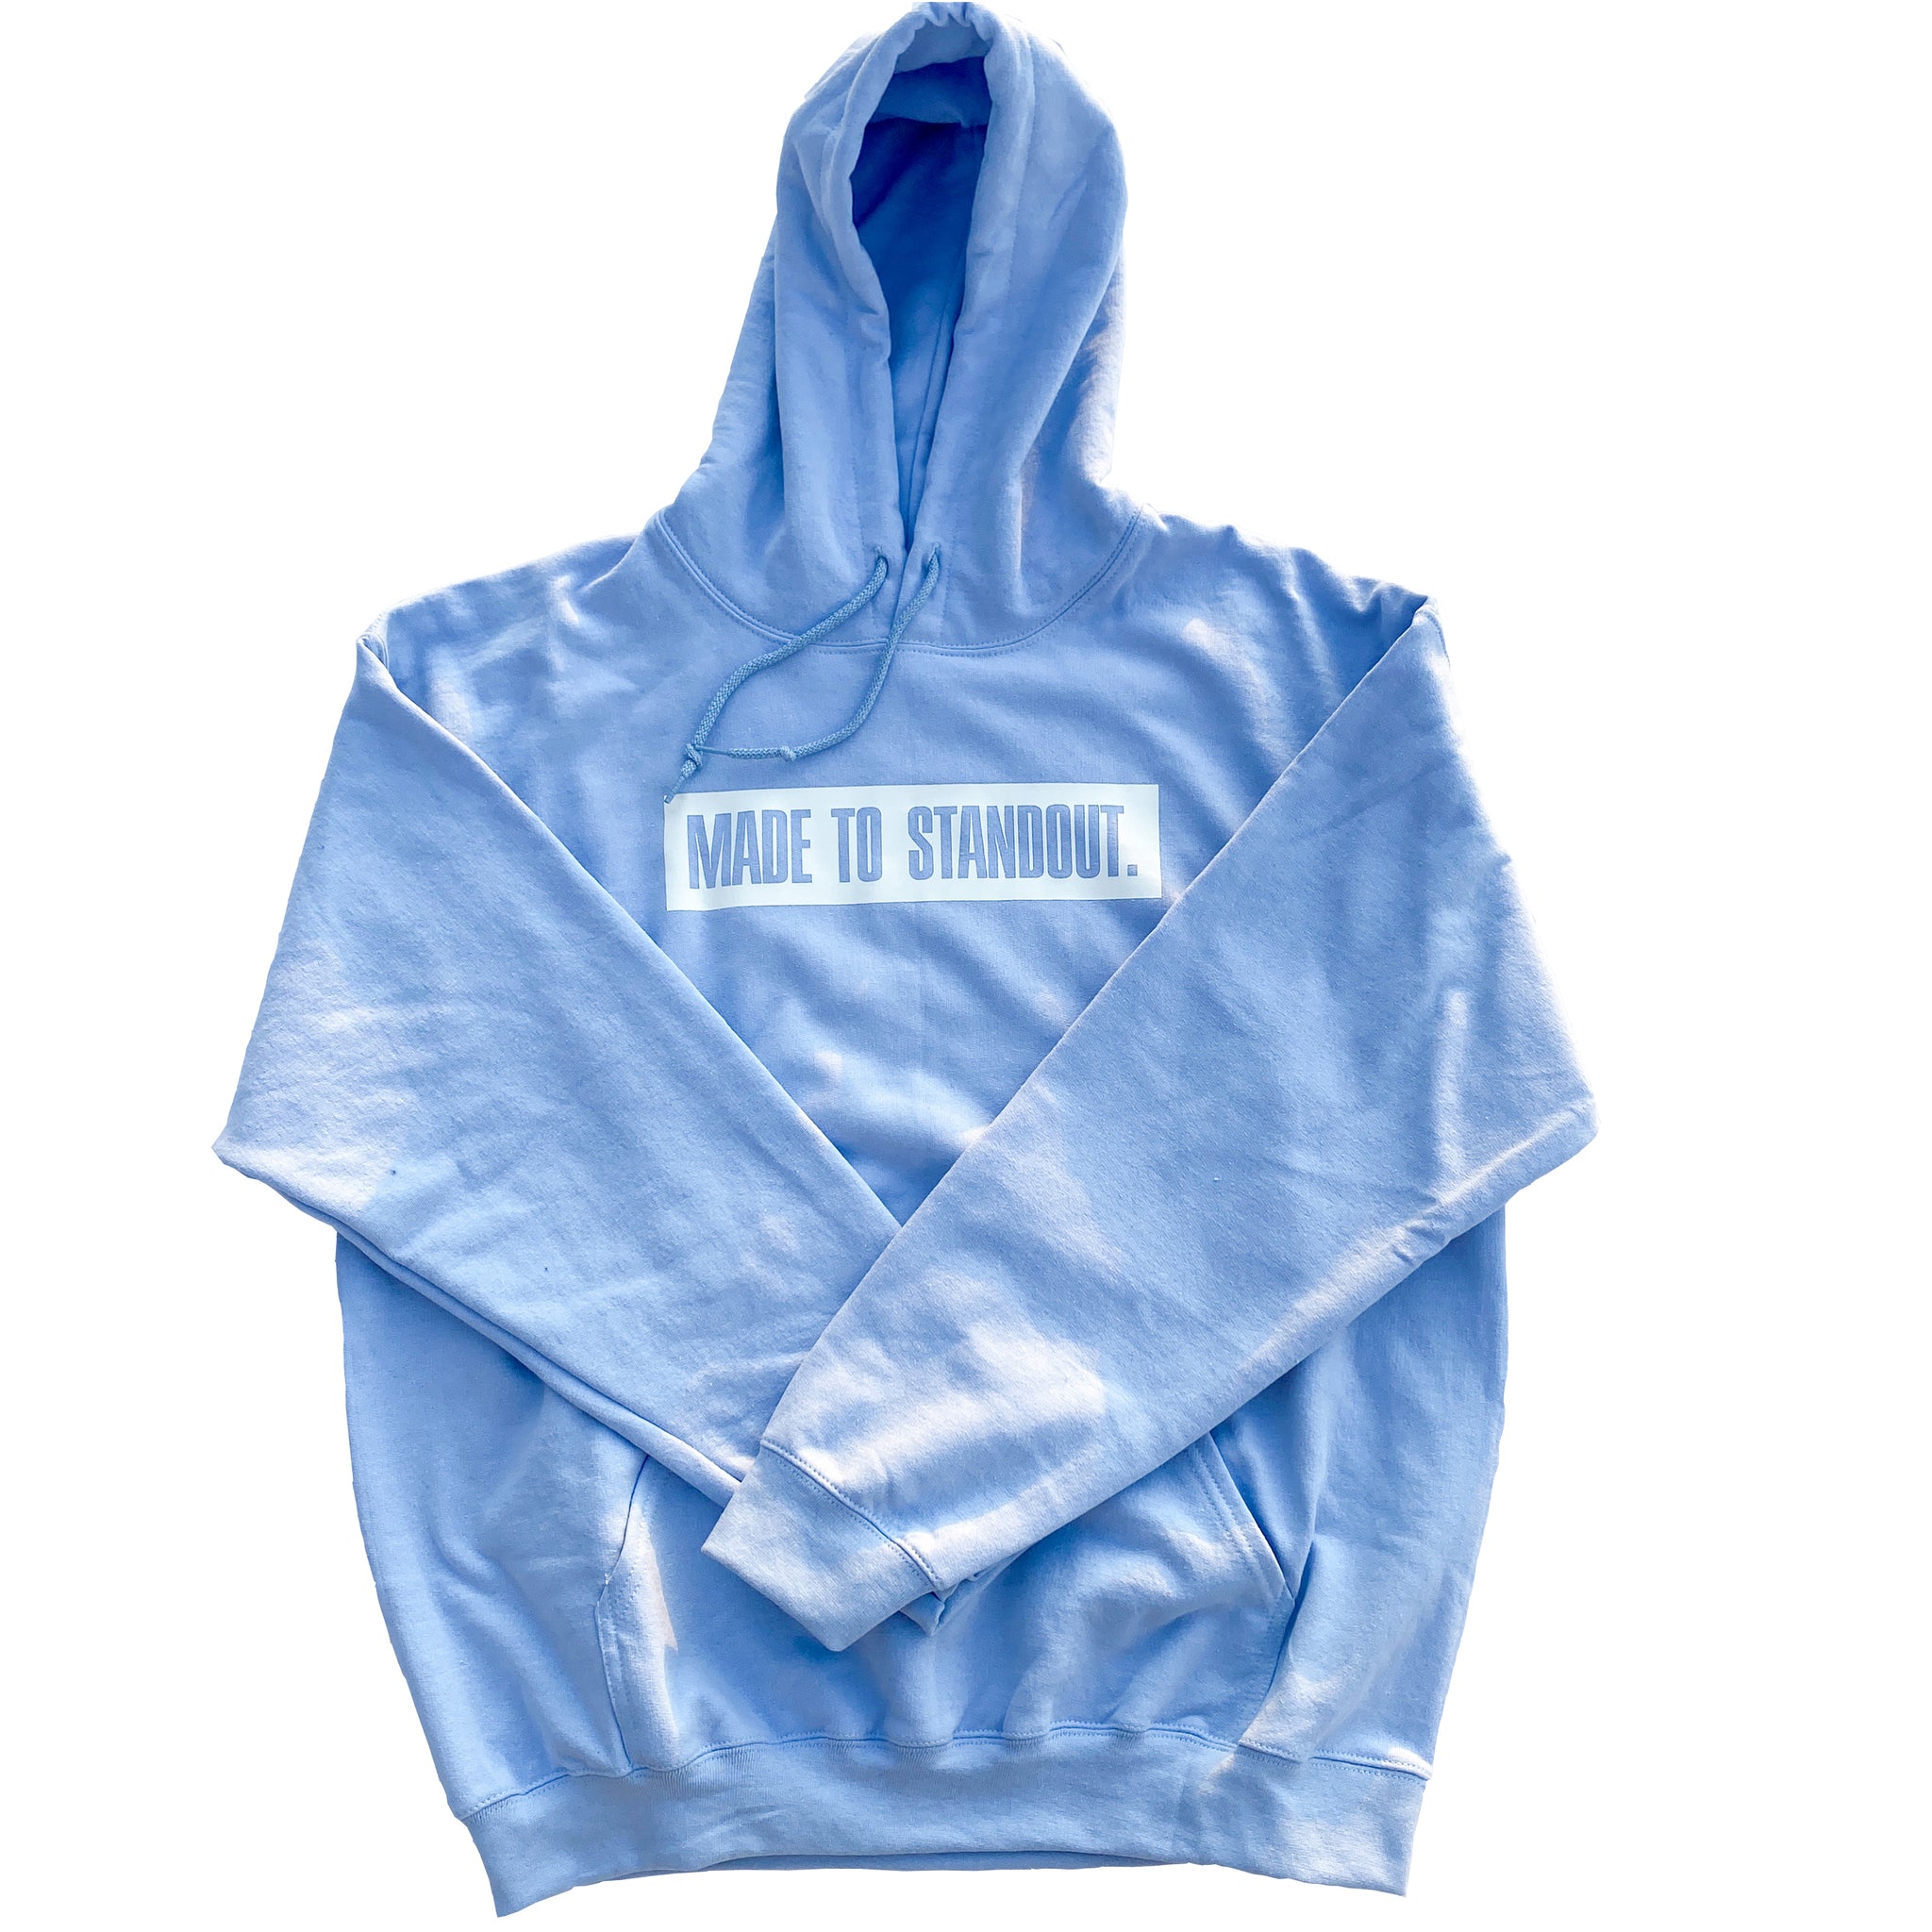 Box Logo Hoodie - Light Blue/White – Made To Standout